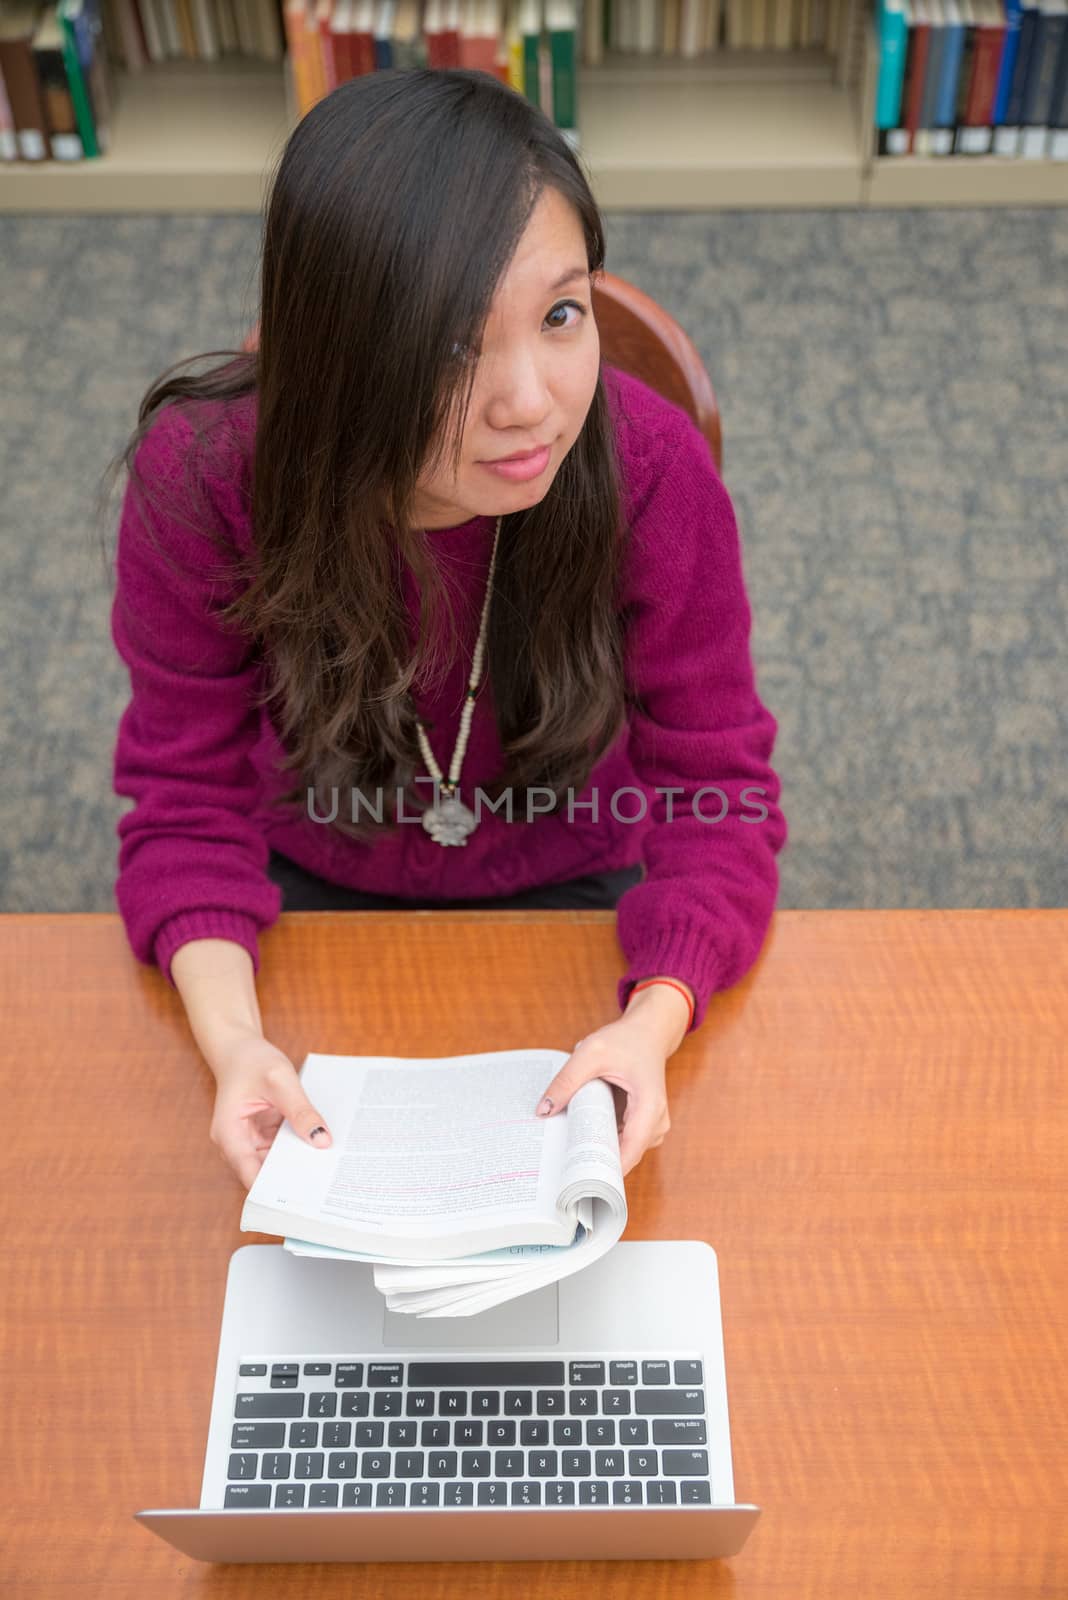 Woman with book and laptob studying in library